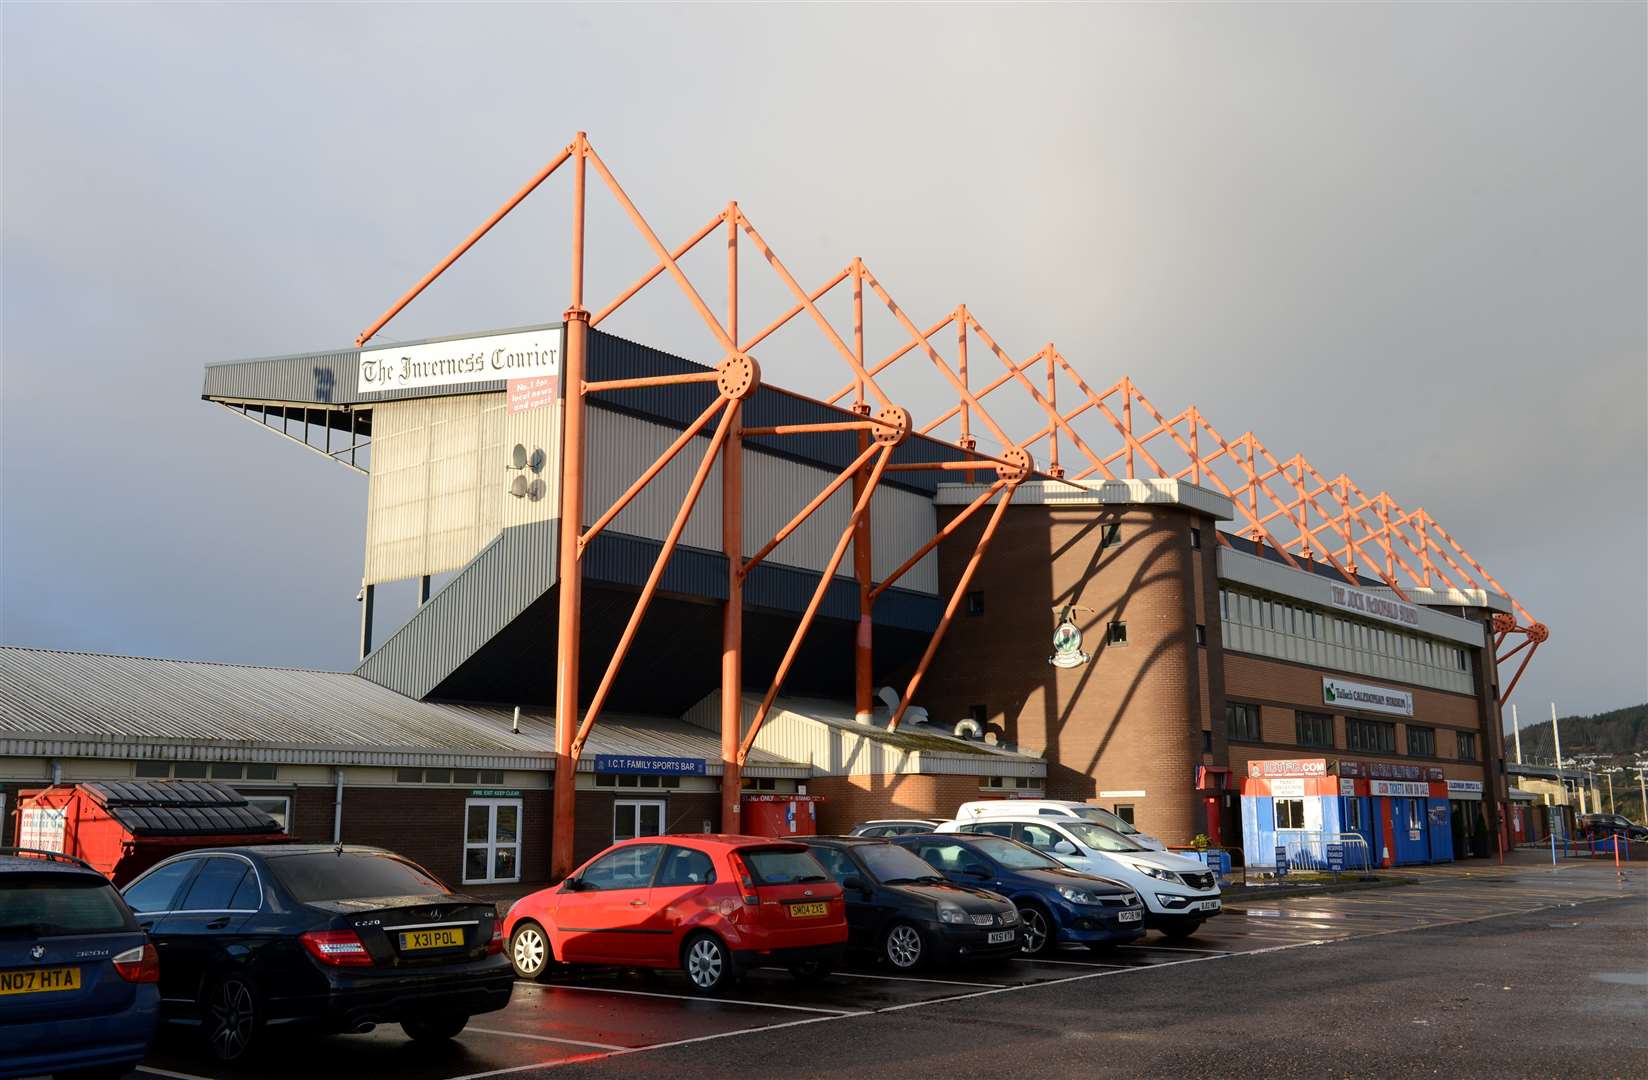 Shareholders will attend the Inverness Caledonian Thistle EGM tonight.